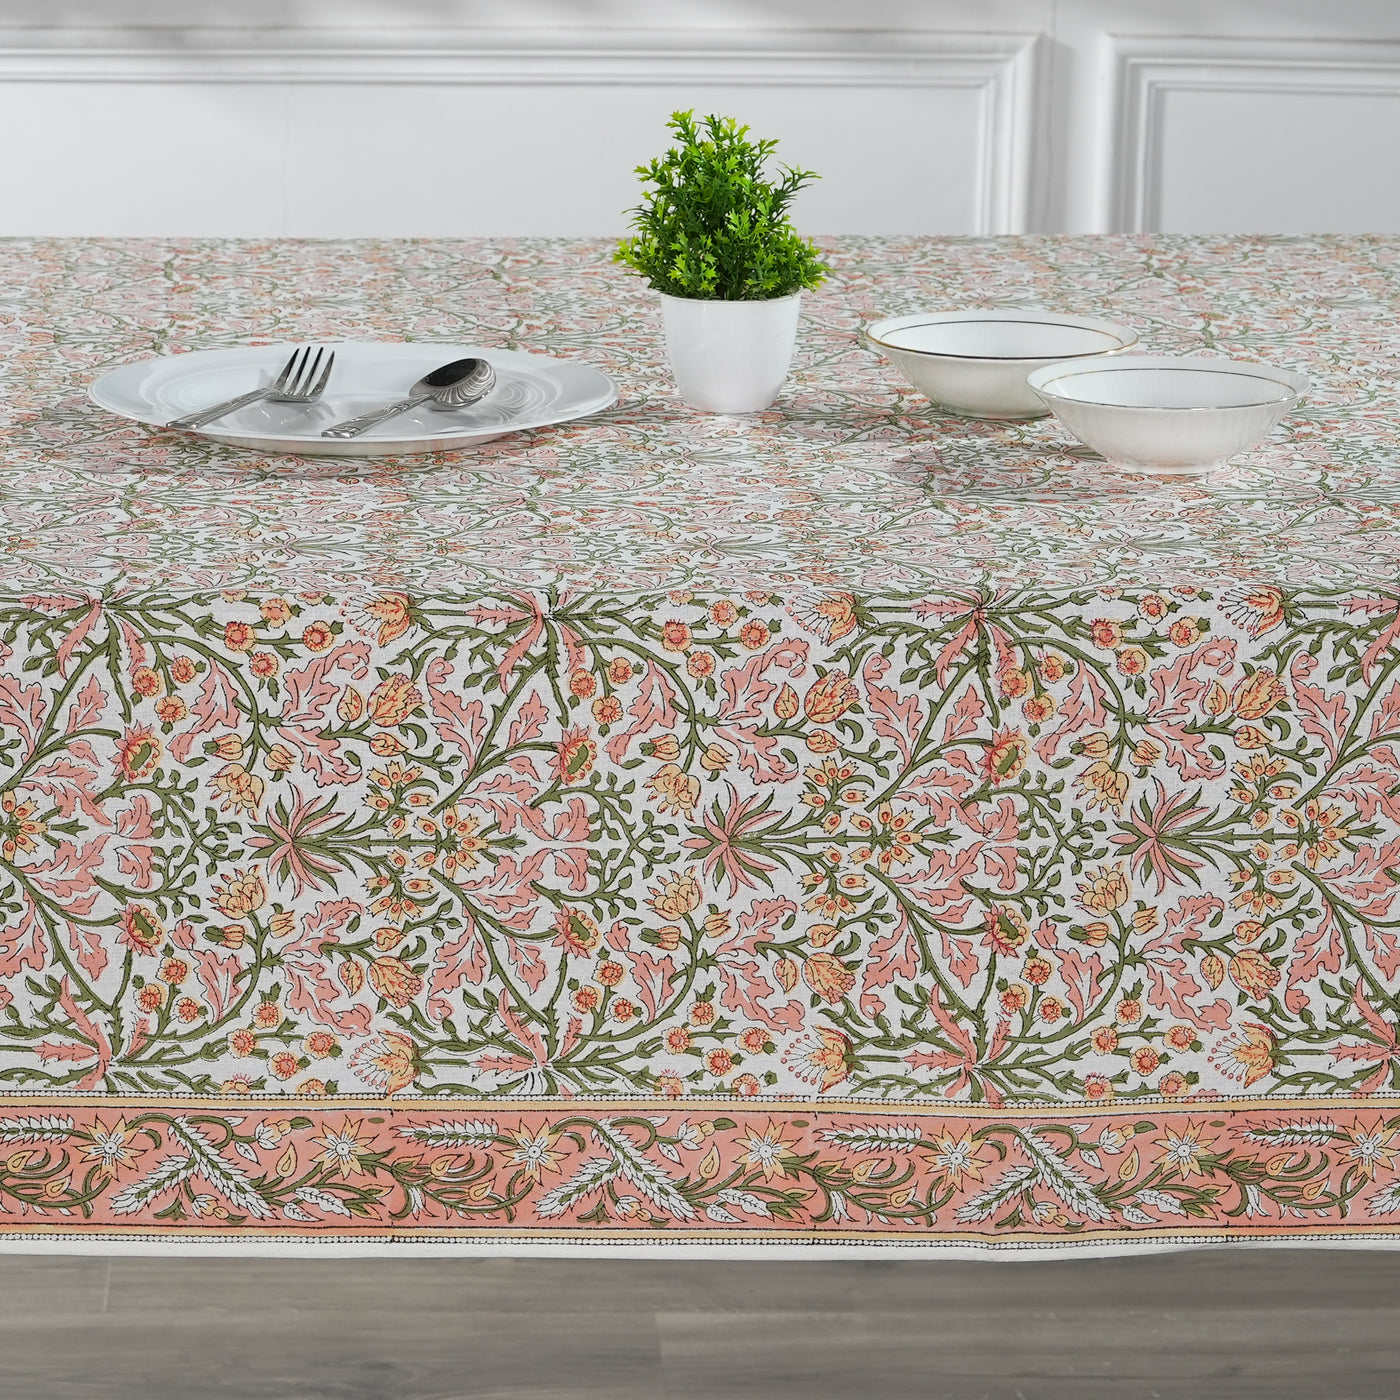 Fabricrush Tablecloth, Sassy and Salmon Pink Indian Hand Block Floral Printed Cotton Table Cover, Table Top, French Tablecloth